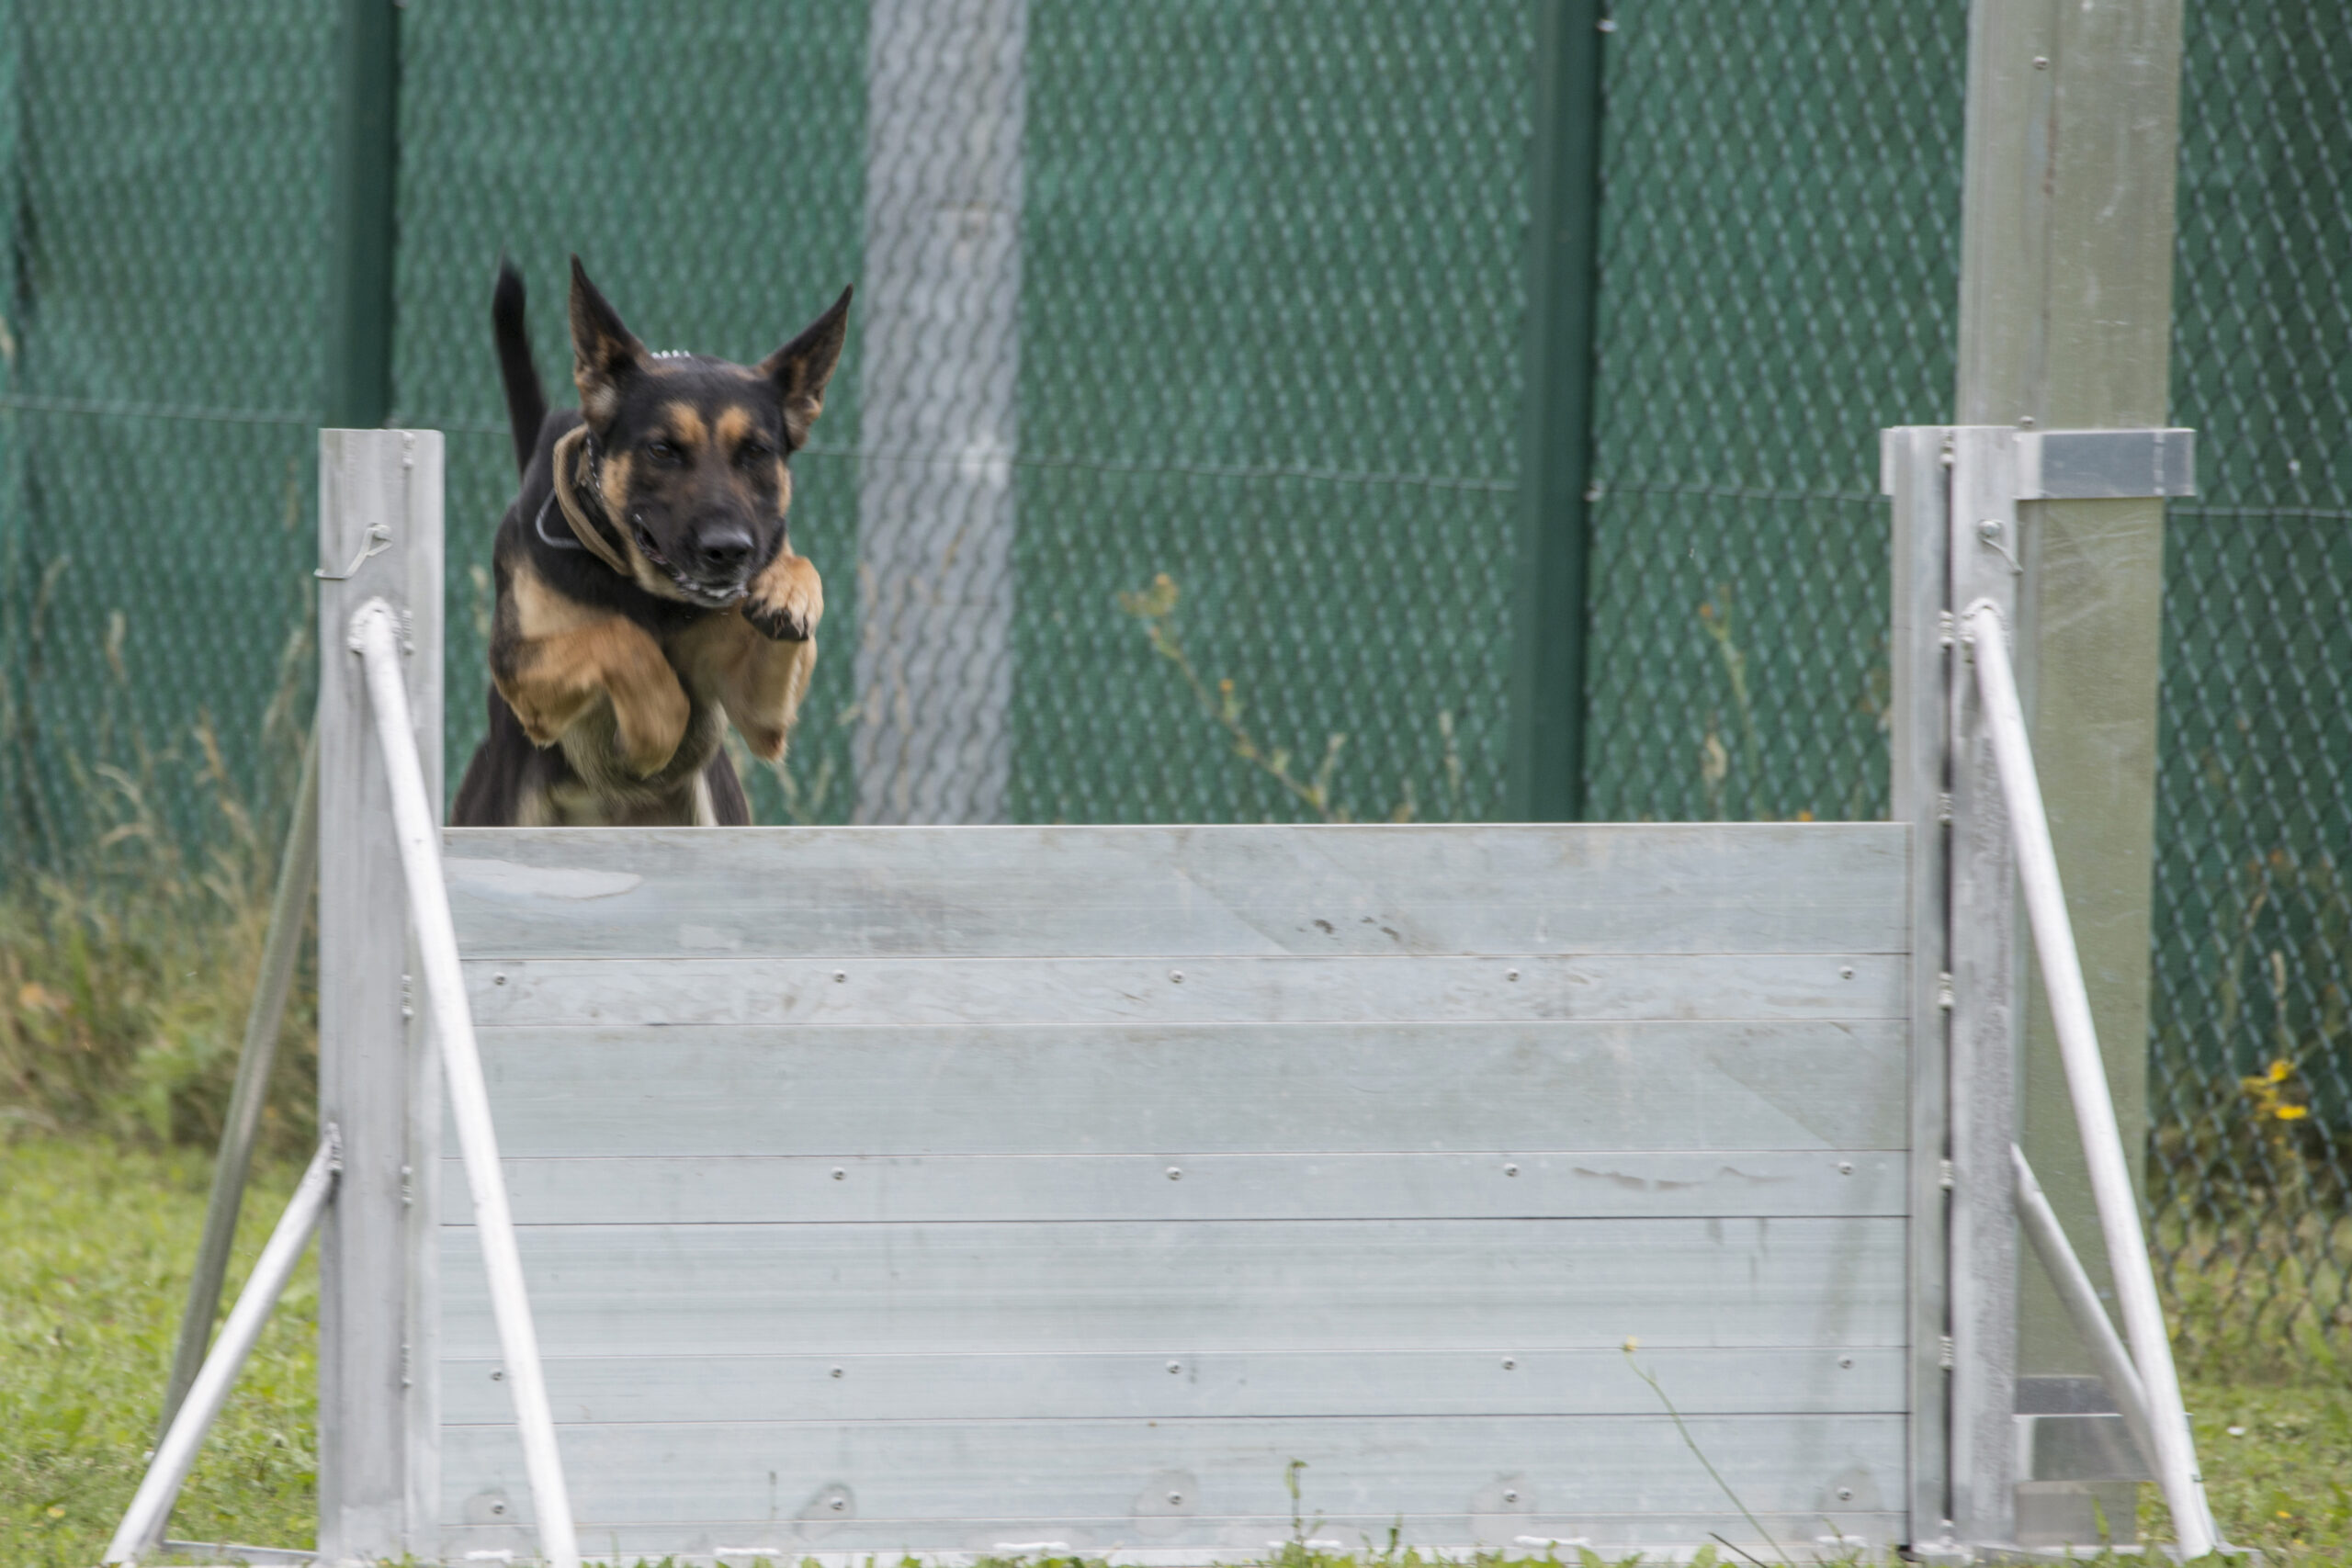 U.S. Soldiers with the 131st Military Working Dog Detachment, 615th Military Police Company, conduct dog-handler training at Oberdachstetten Range Area at U.S. Army Garrison Ansbach in Bavaria, Germany, July 18, 2017. Military working dogs are trained to subdue or intimidate suspects before having to use lethal force; they are also used for detecting explosives, narcotics and other harmful materials. (U.S. Army photo by Visual Information Specialist Georgios Moumoulidis, TSC Ansbach)